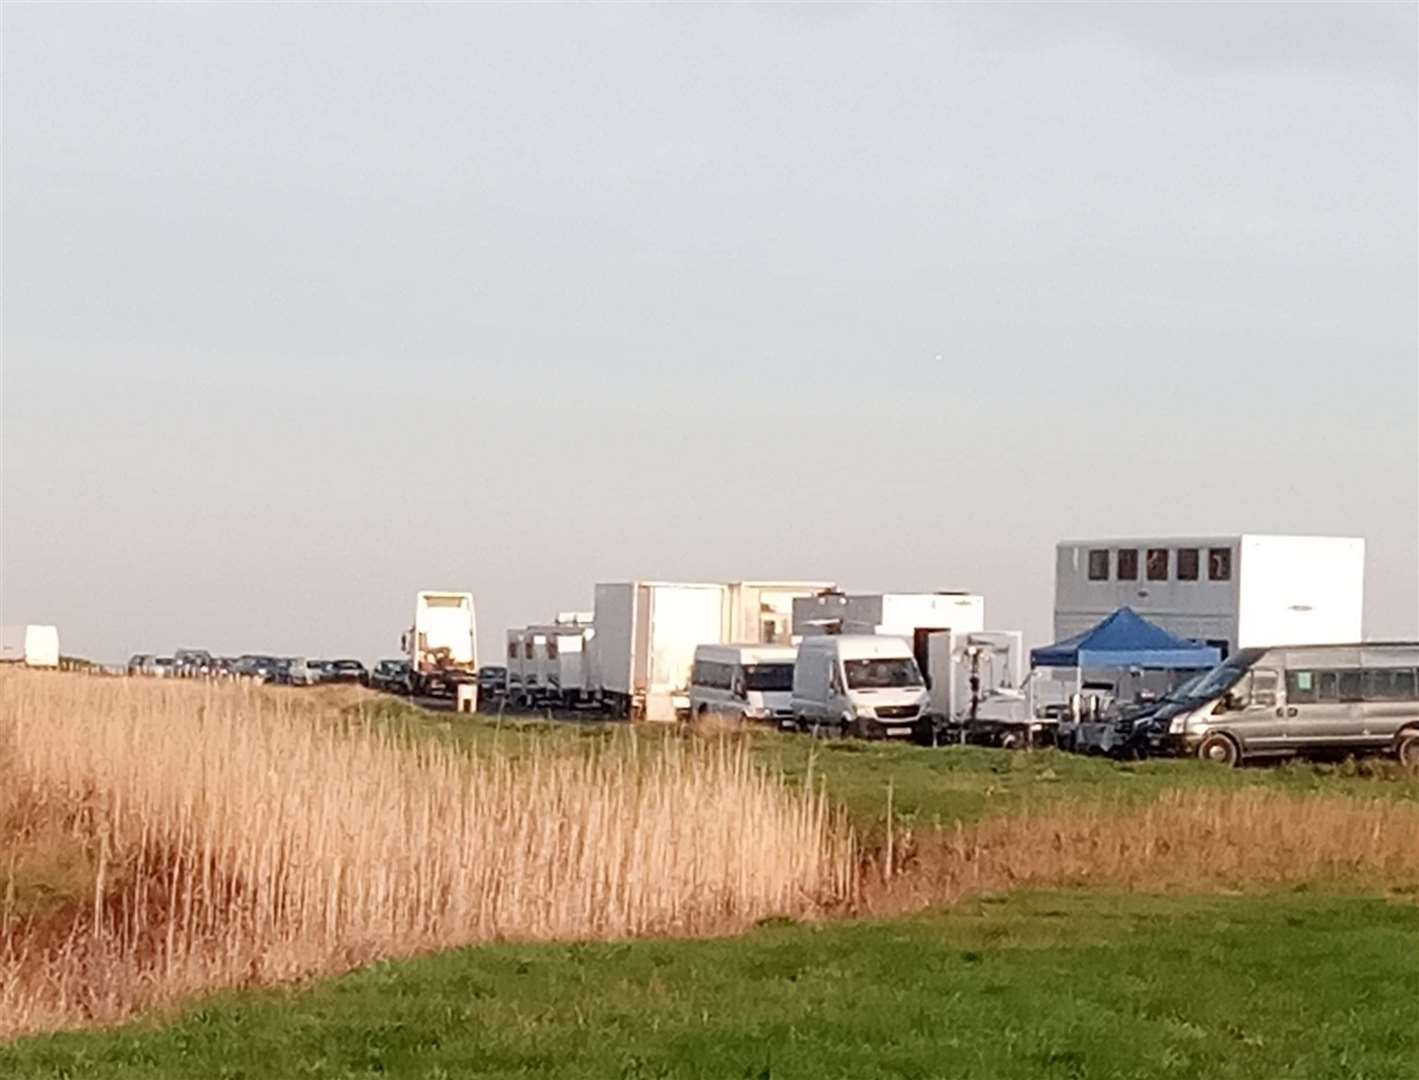 Production crews in Shellness, near Leysdown, filming for a new Channel 4 drama called My Name is Lizzie Picture: Jane Hill